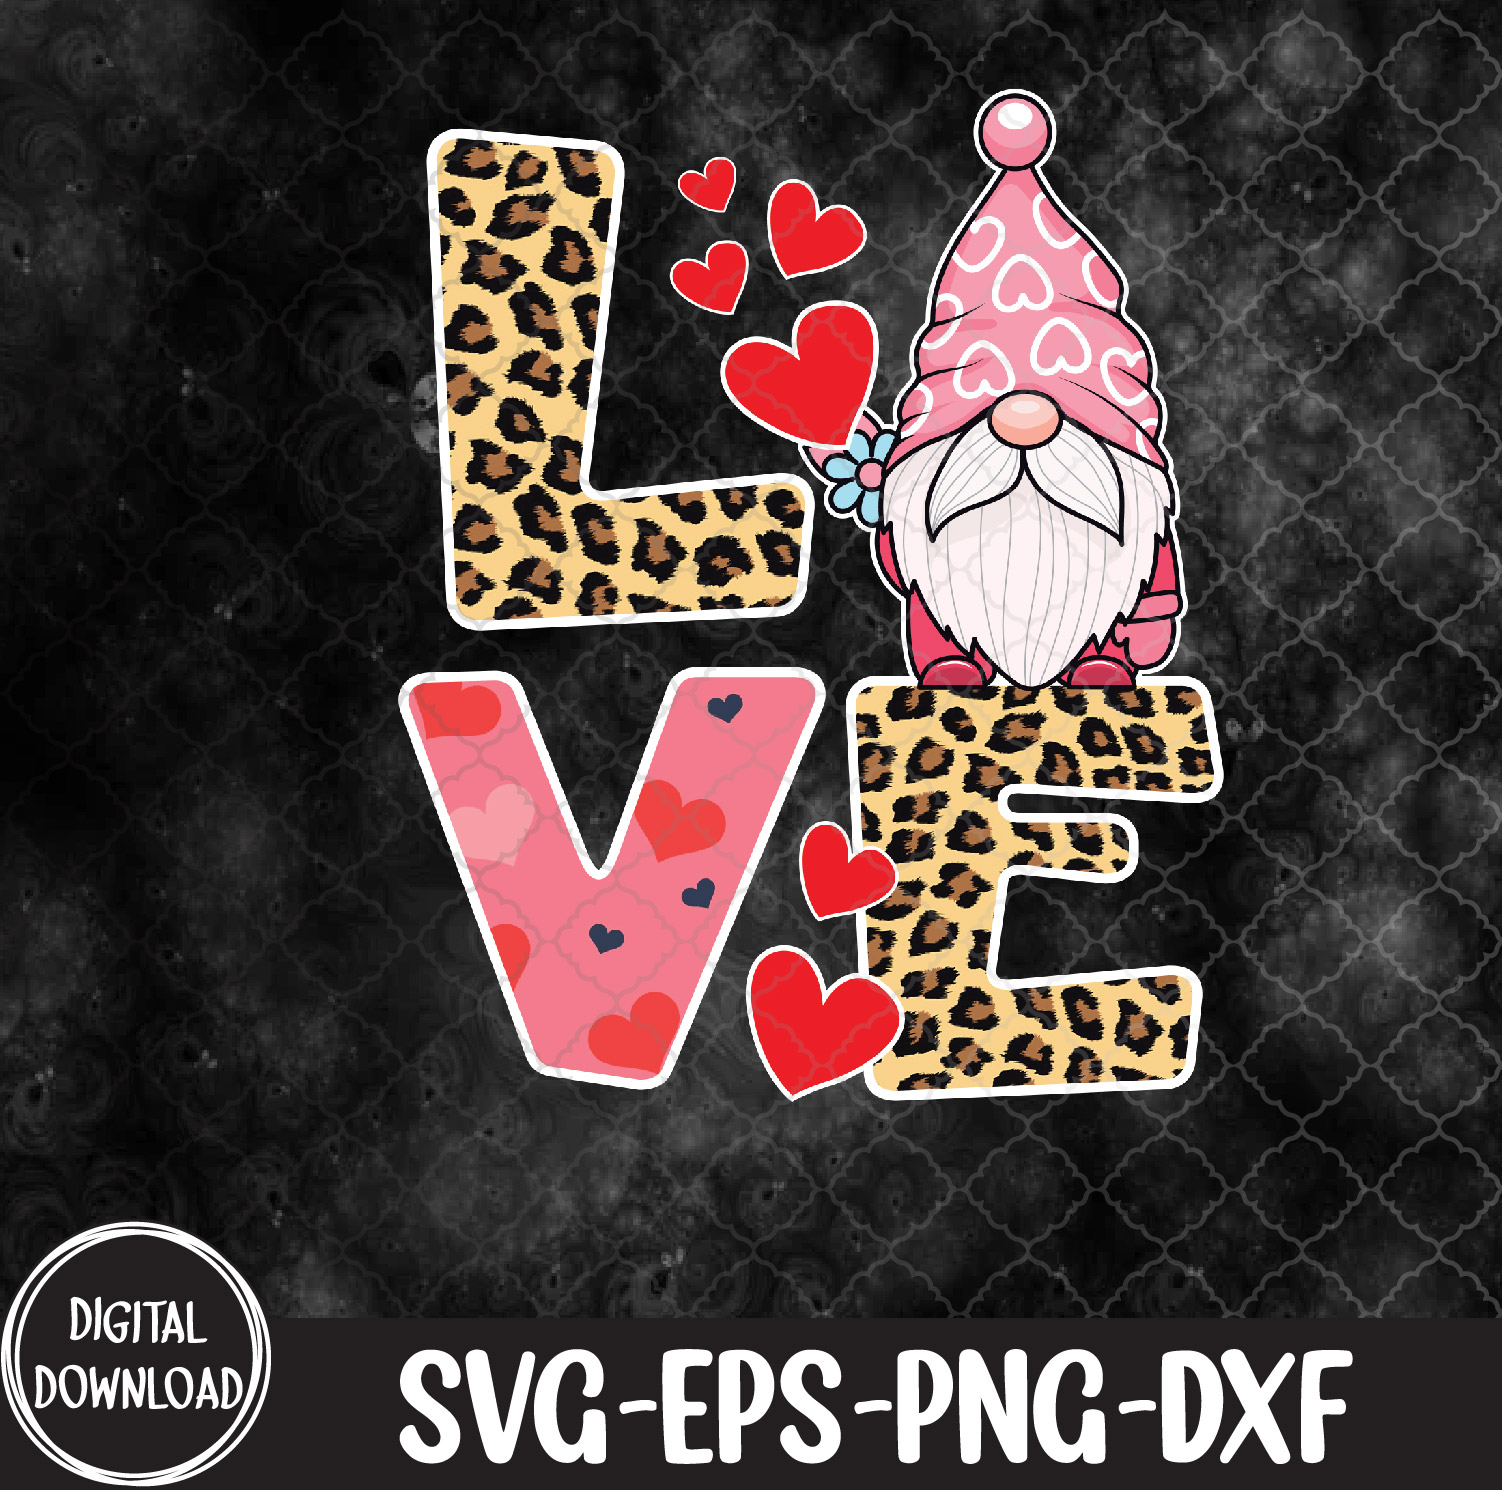 WTMNEW9file 09 17 Valentines Day Cute Love Heart Gnome Leopard Cheetah, Valentines Day svg, Svg, Eps, Png, Dxf